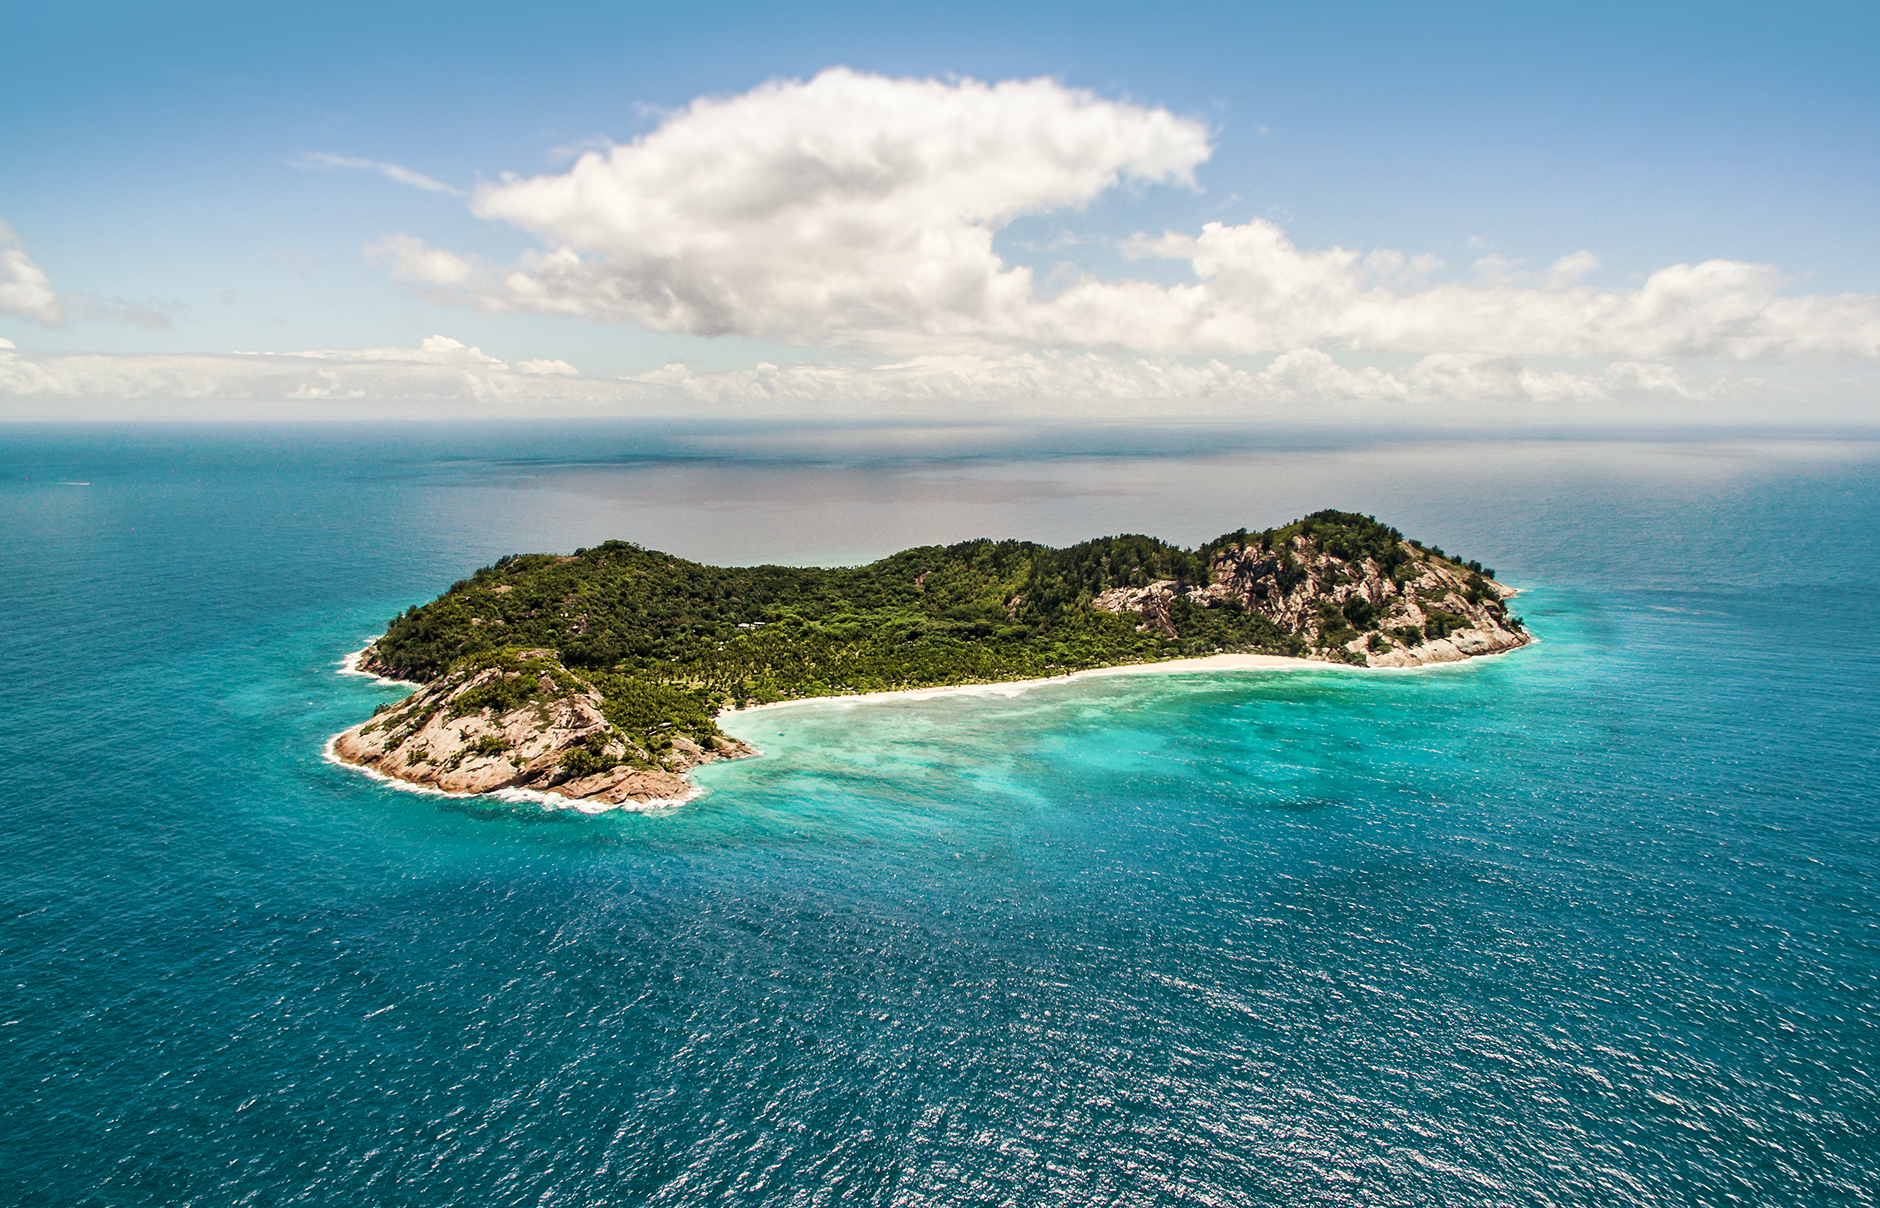 North Island, a Luxury Collection Resort, Seychelles. Luxury Hotel Review by TravelPlusStyle. Photo © North Island 